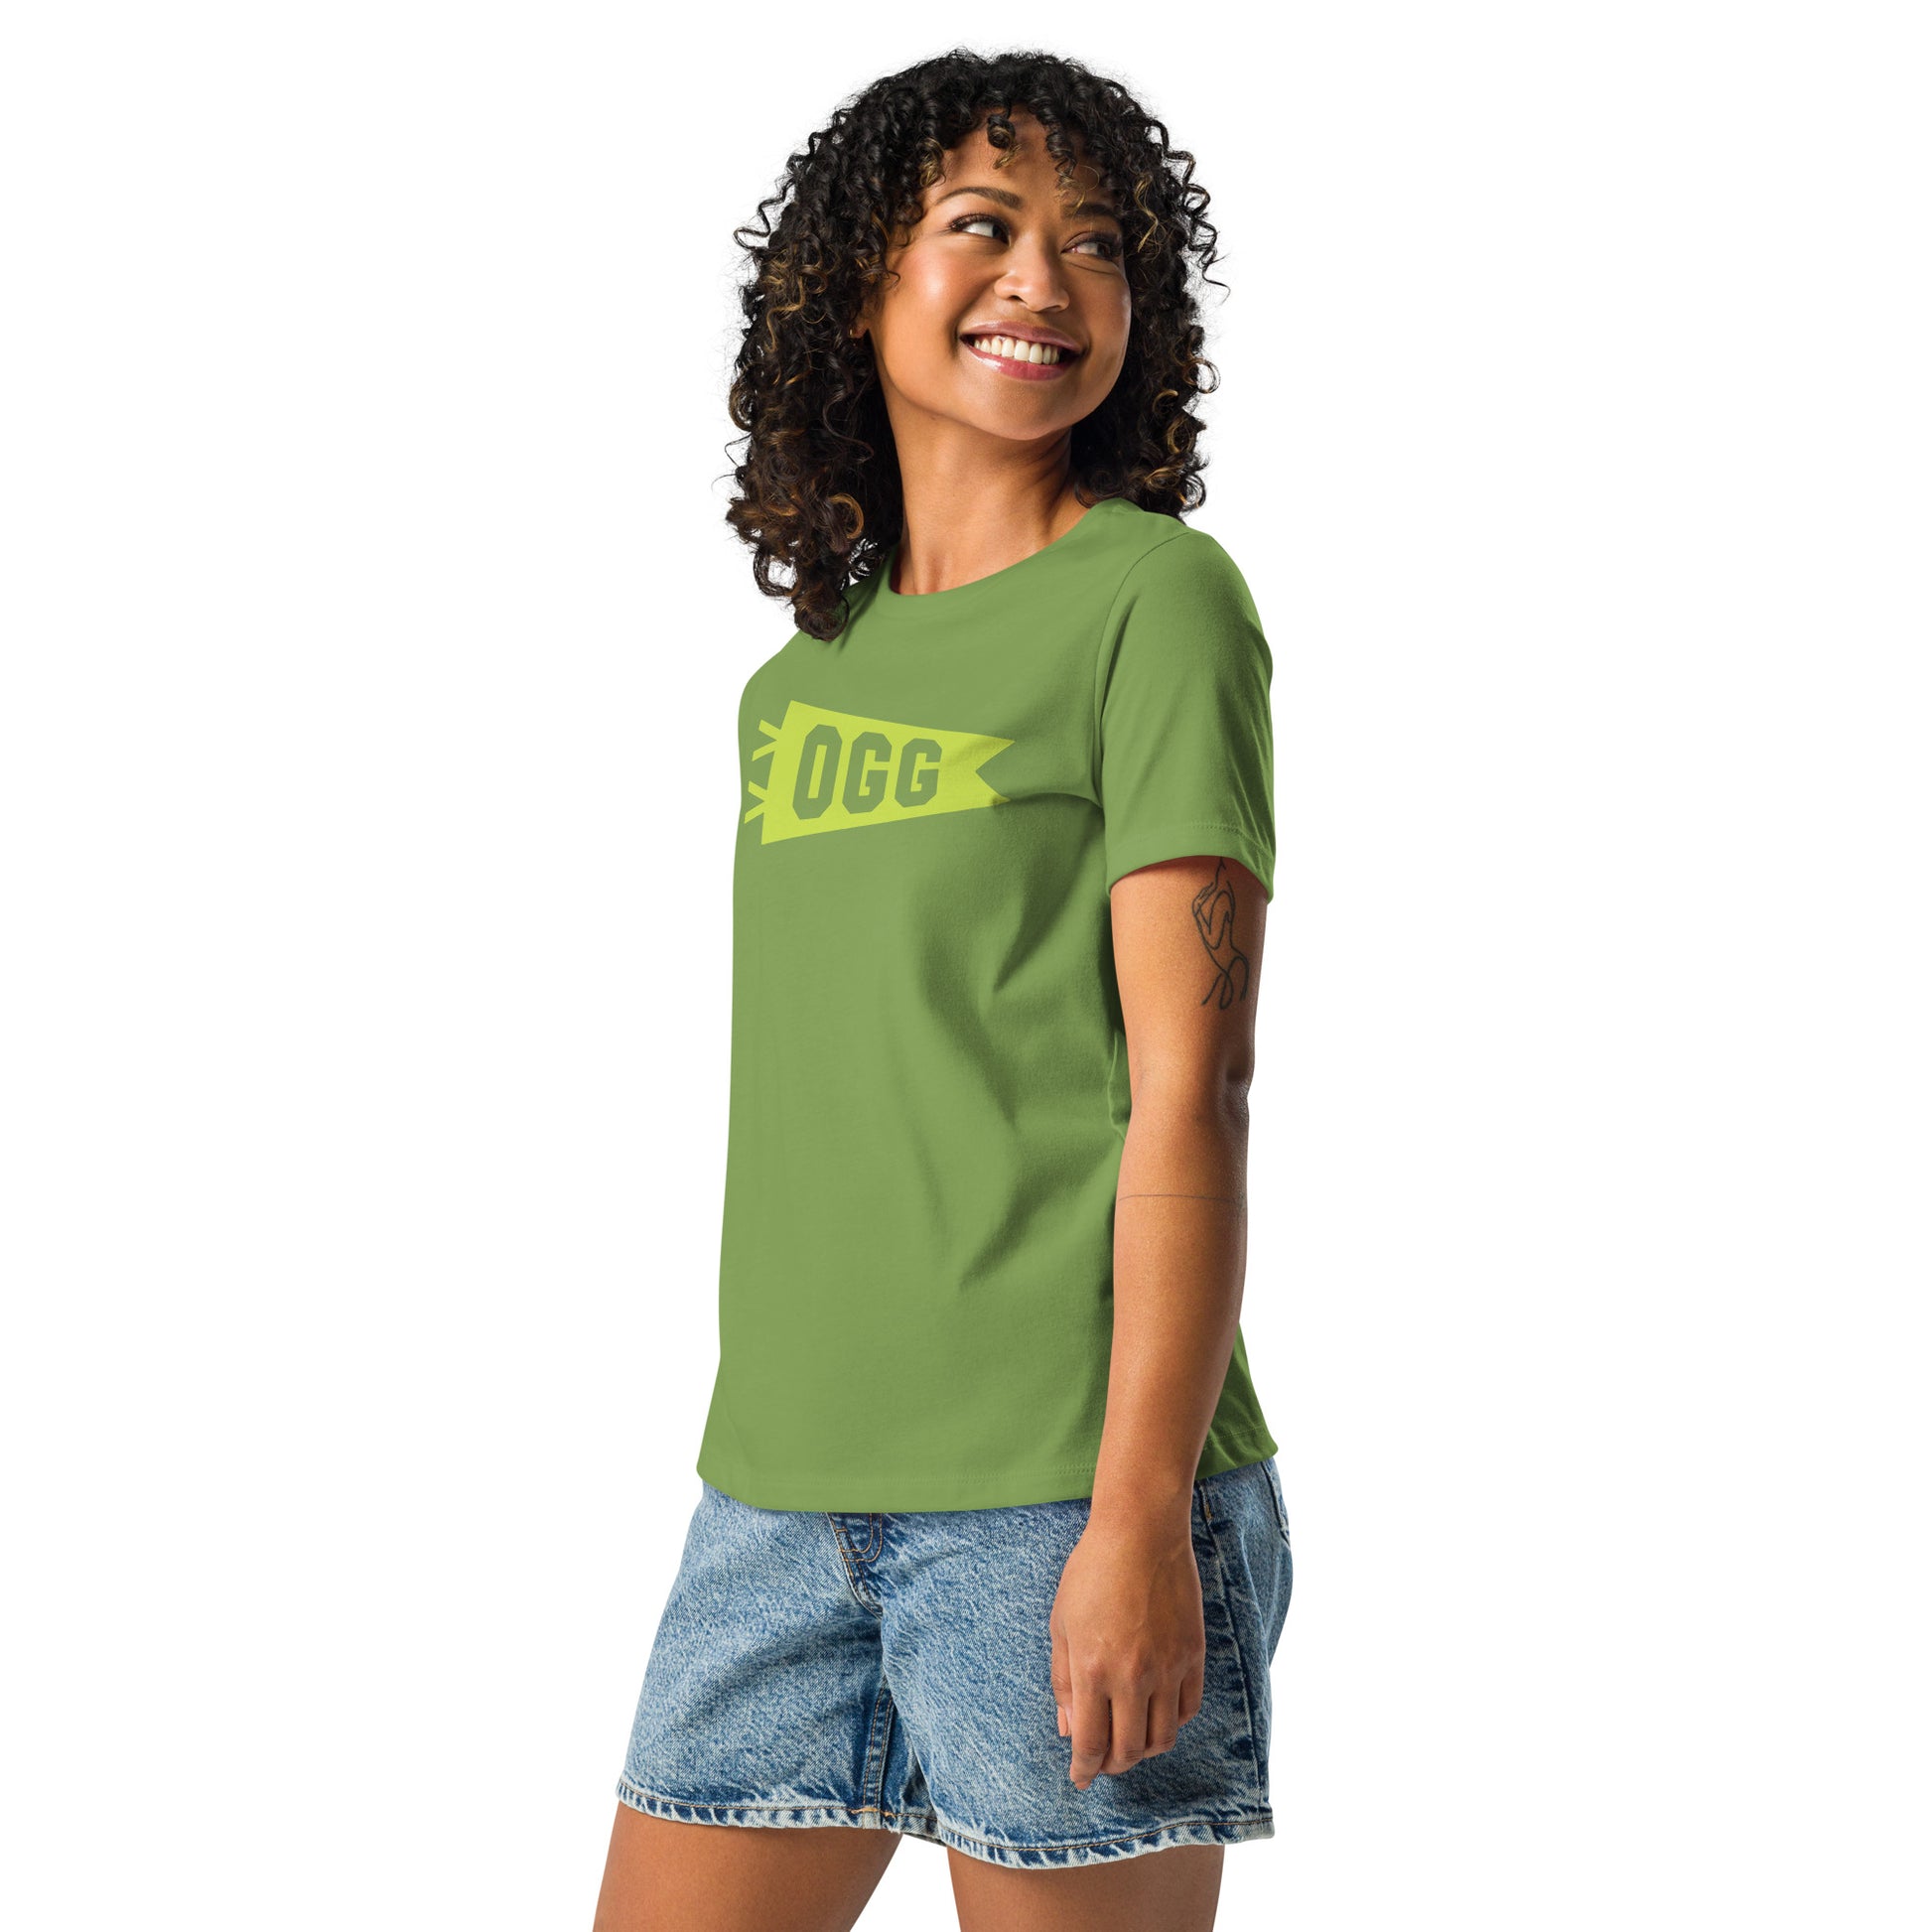 Airport Code Women's Tee - Green Graphic • OGG Maui • YHM Designs - Image 06